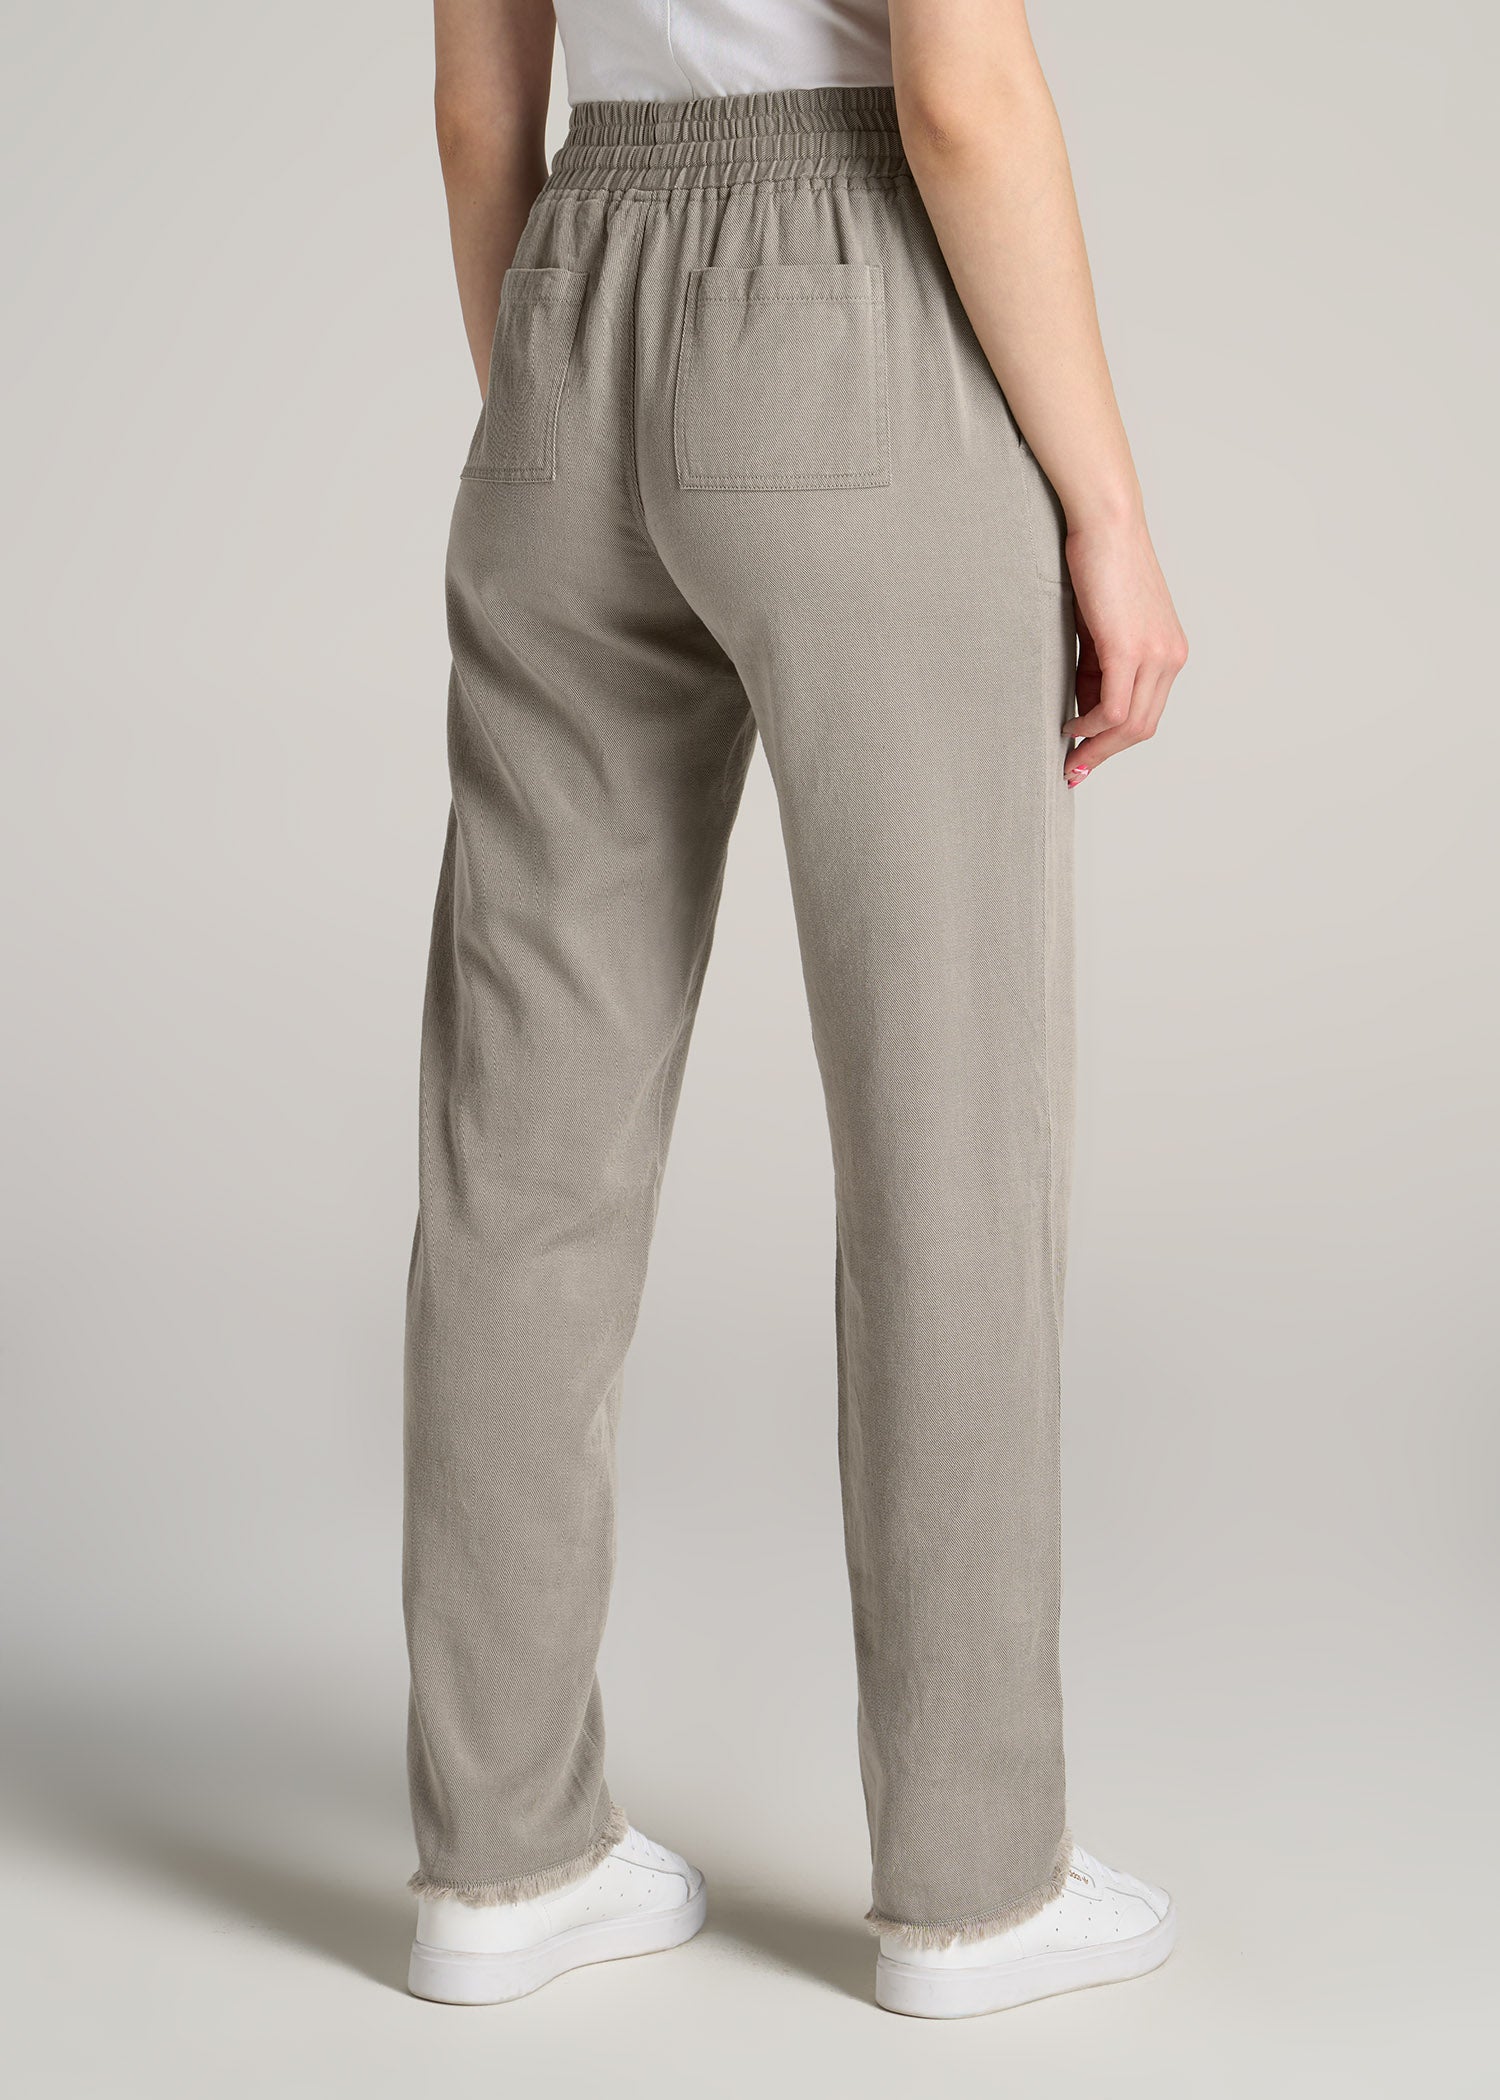 Patch Pocket Twill Pants for Tall Women | American Tall